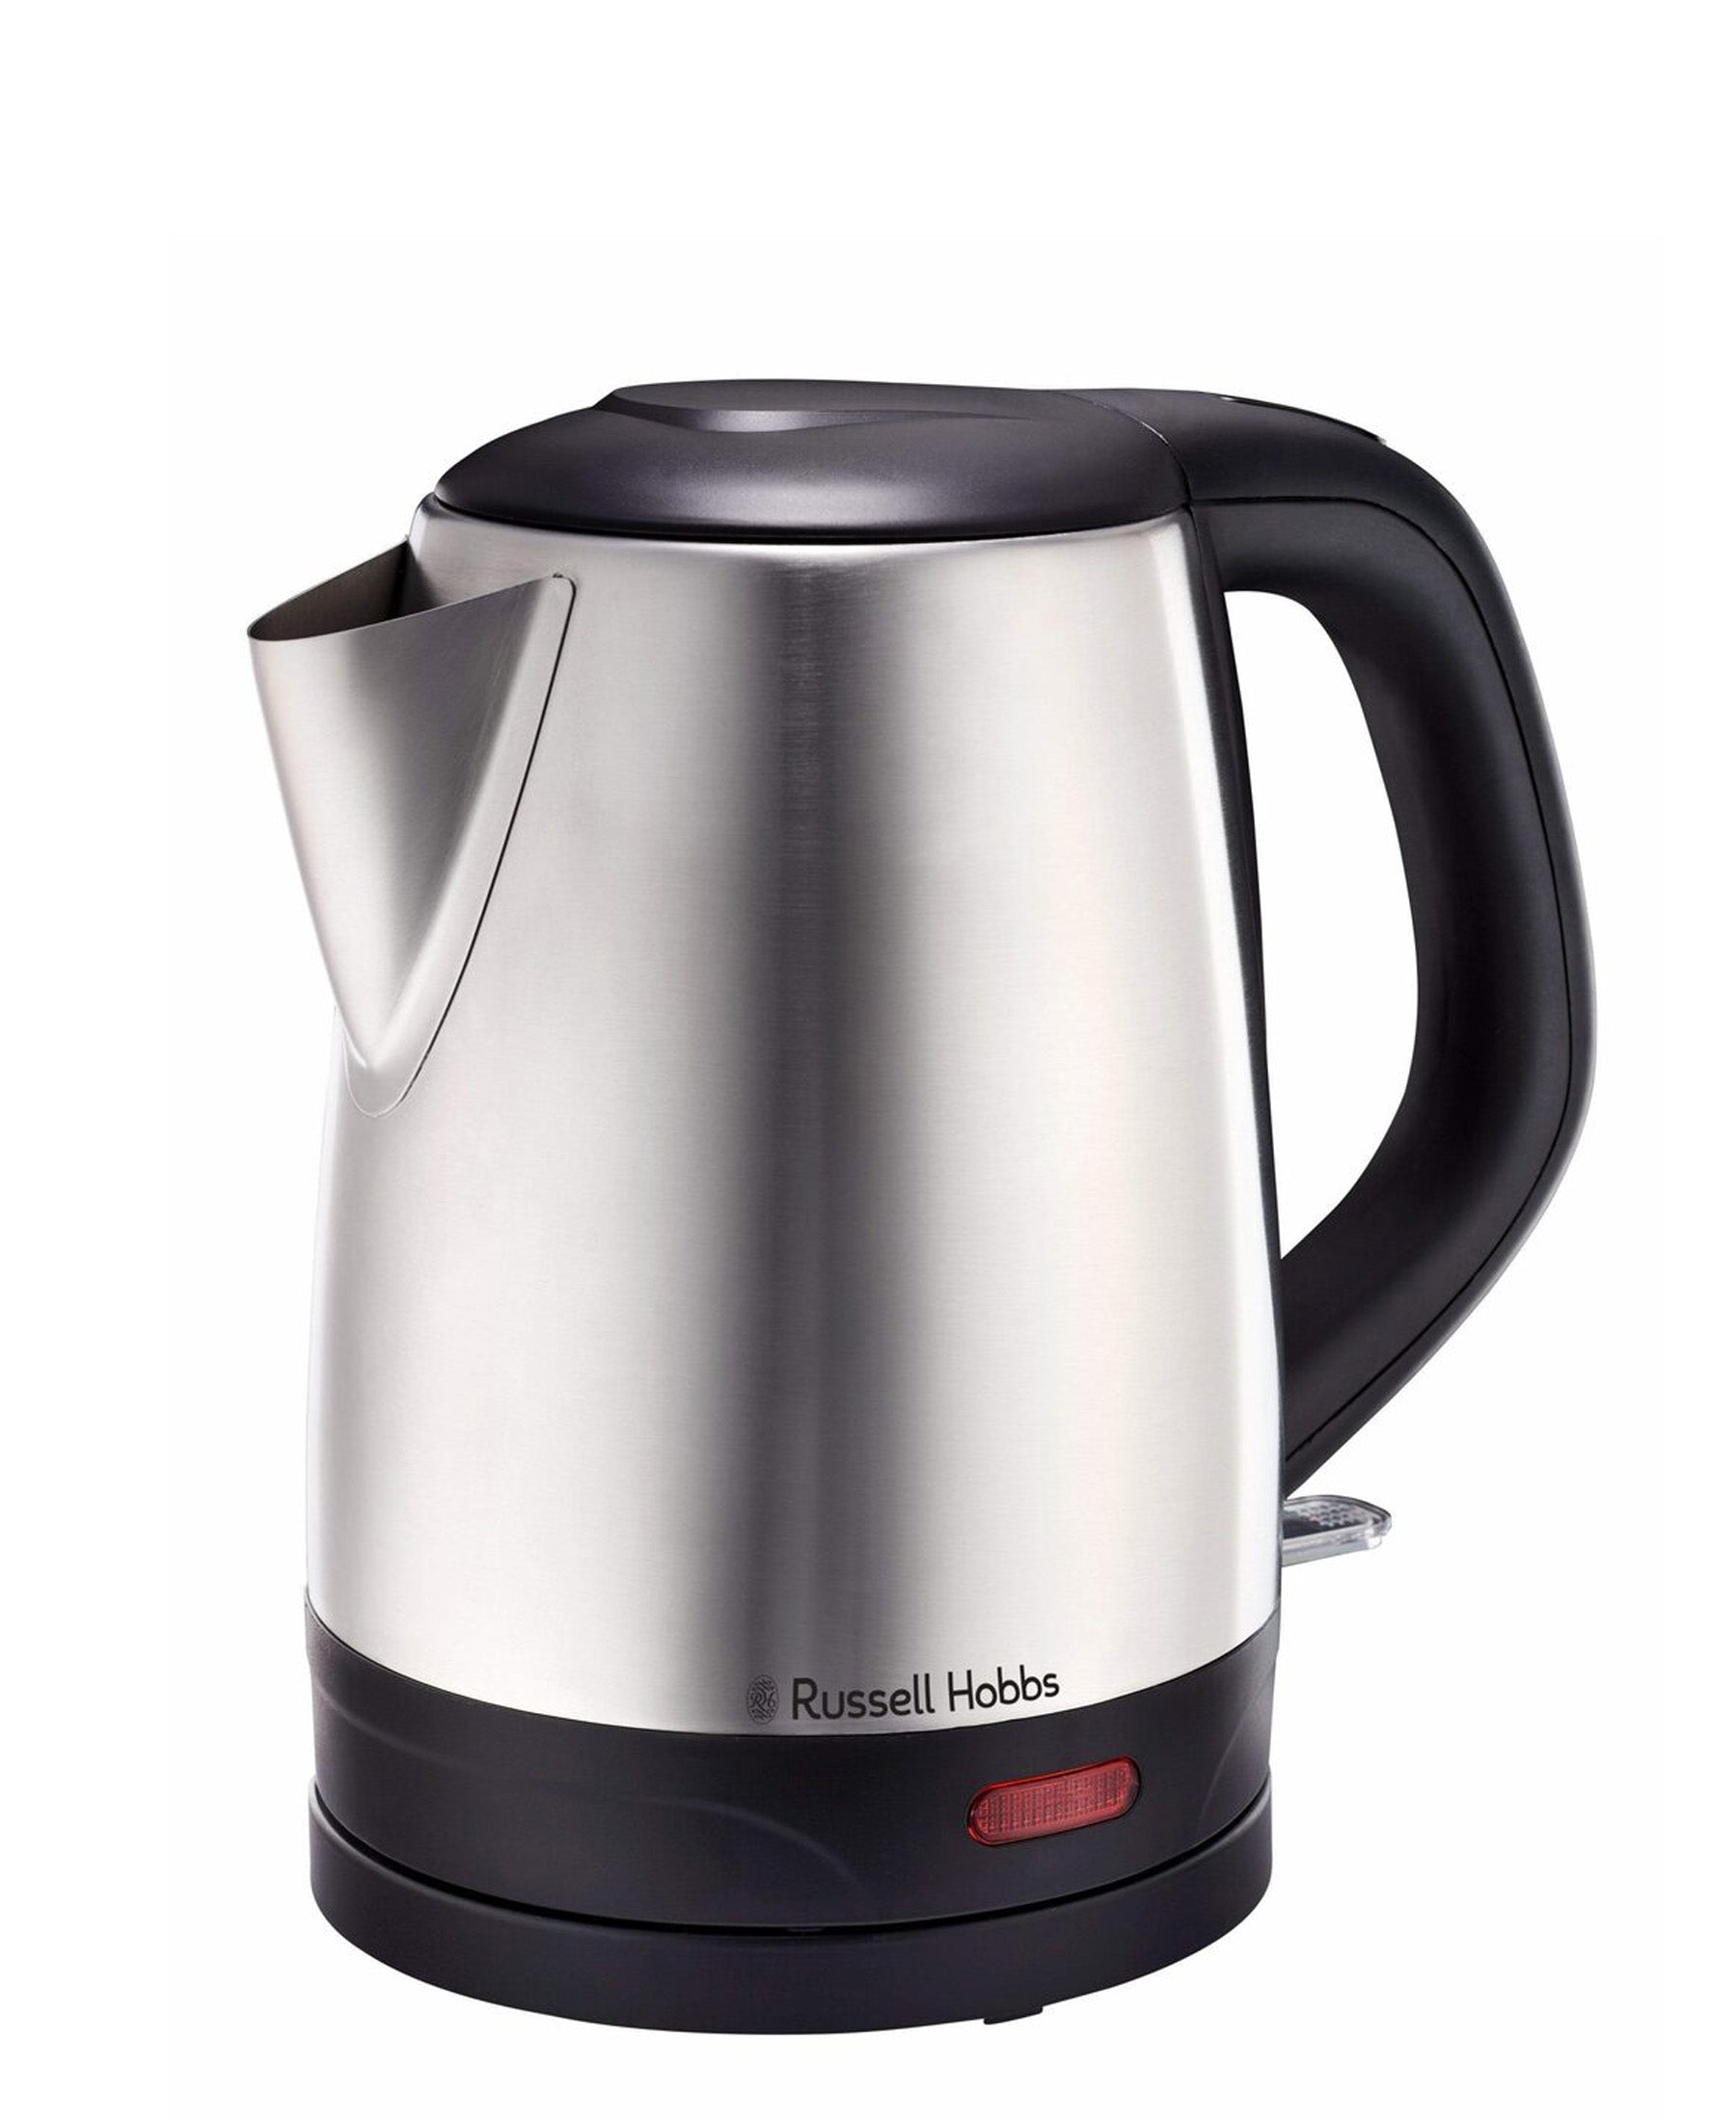 Russel Hobbs 1.7L Cordless Kettle - Silver